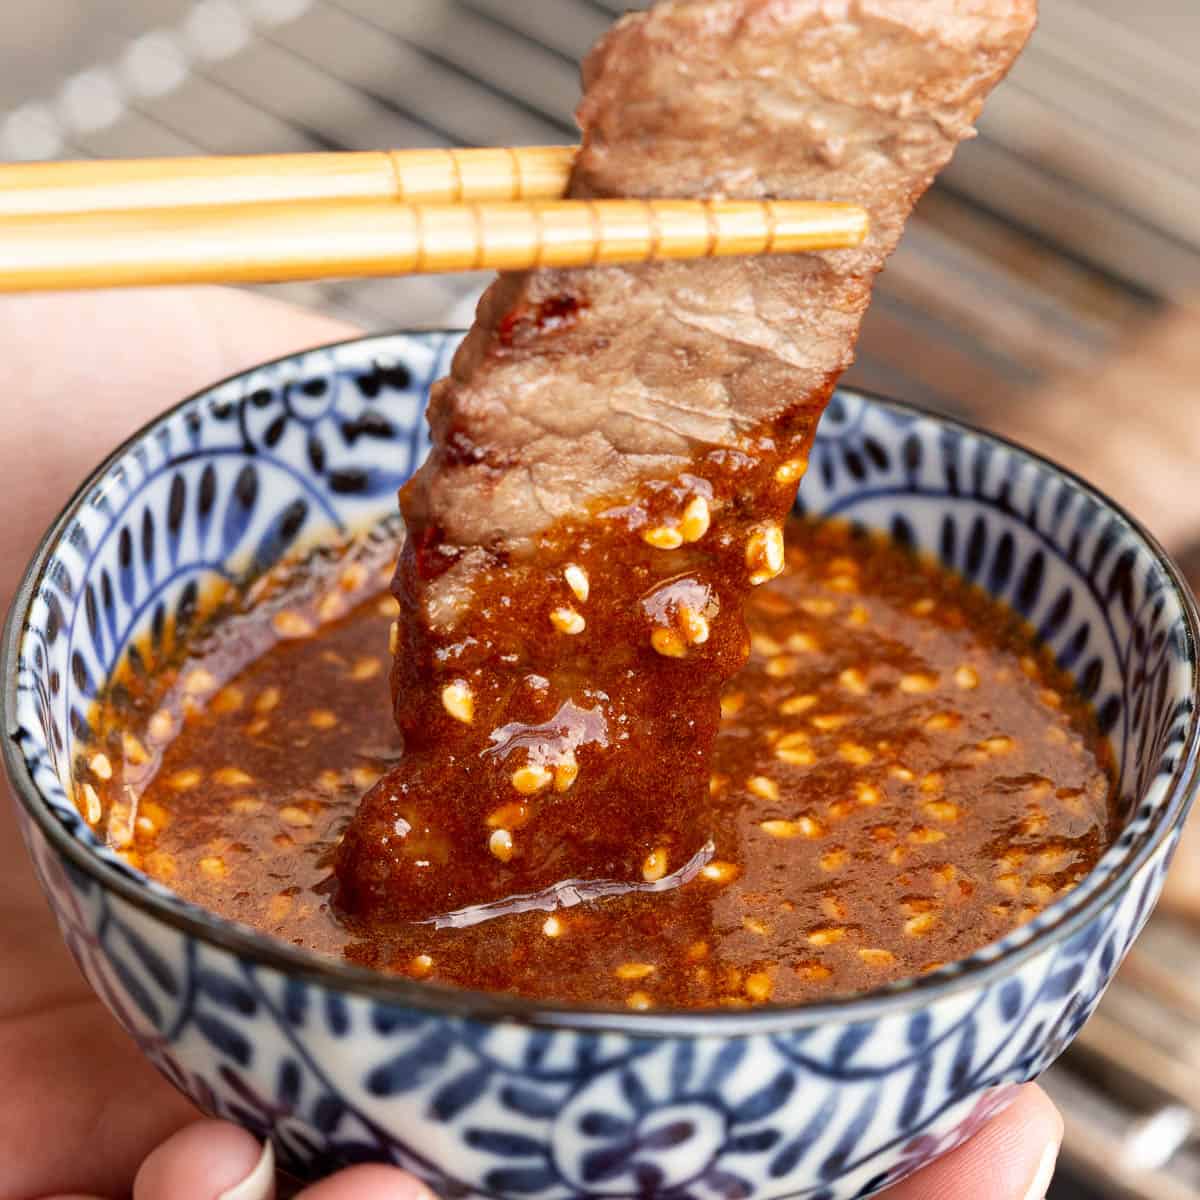 A piece of meat is dipped into homemade yakiniku sauce.